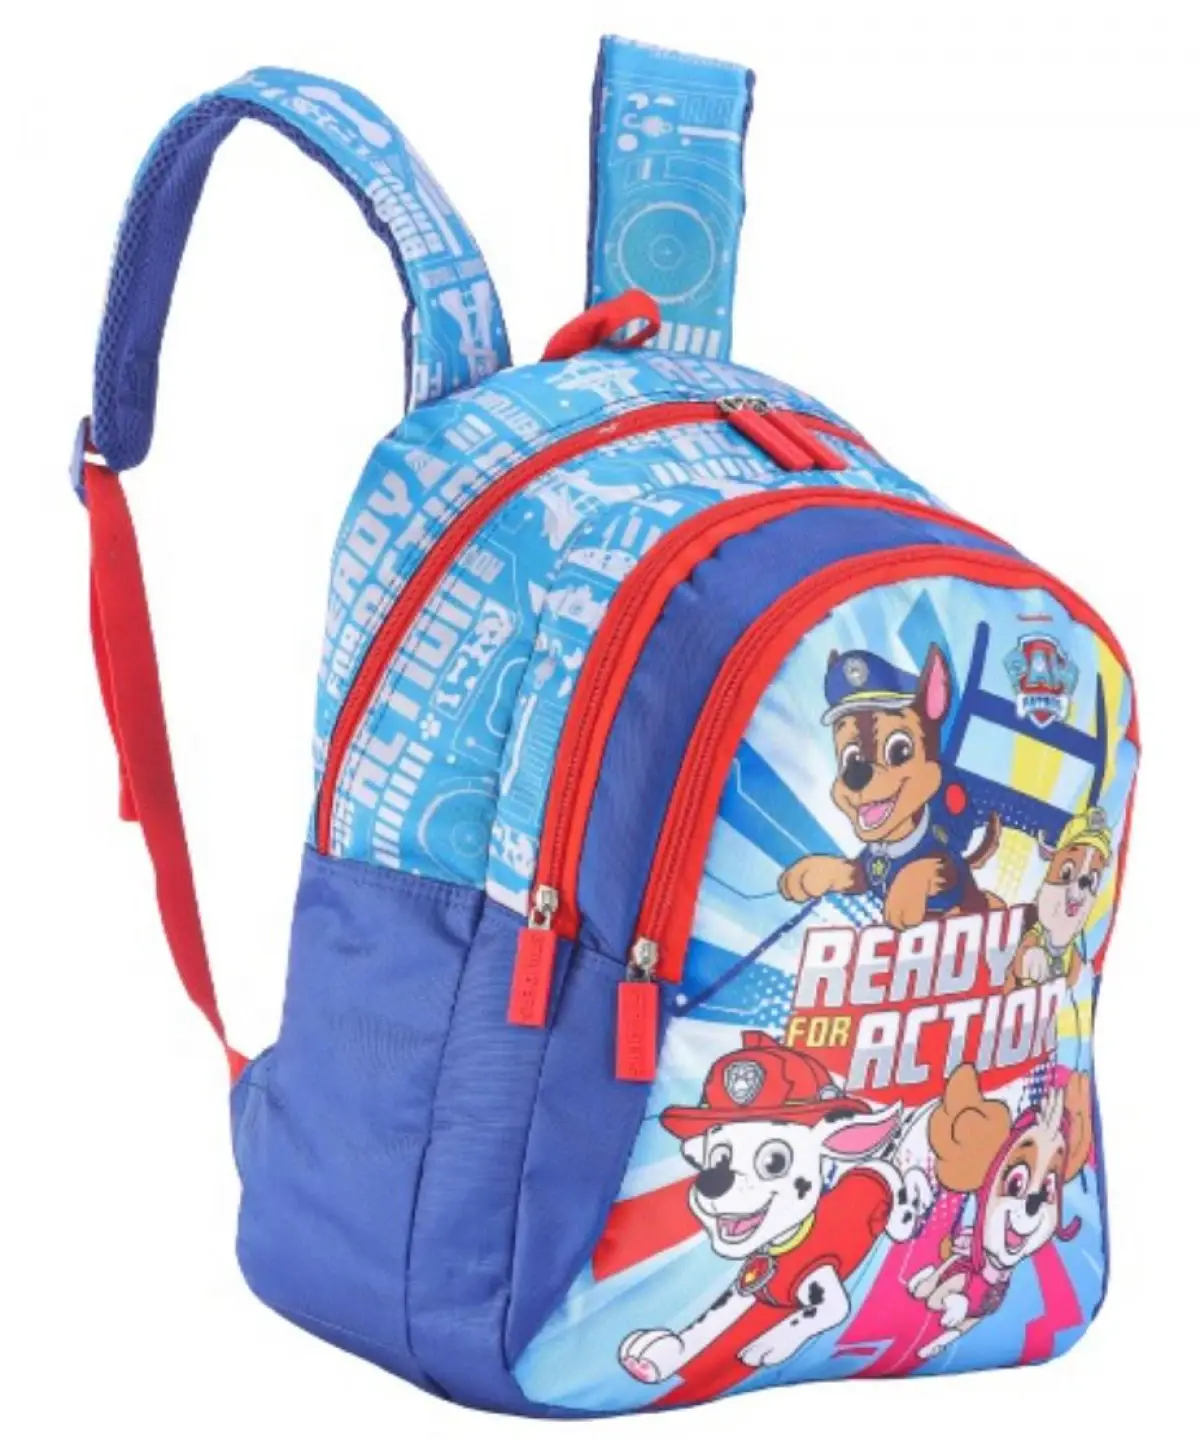 Striders 16 inches Paw Patrol-Inspired School Bag for Little Rescuers Paws and Adventures Multicolour For Kids Ages 6Y+